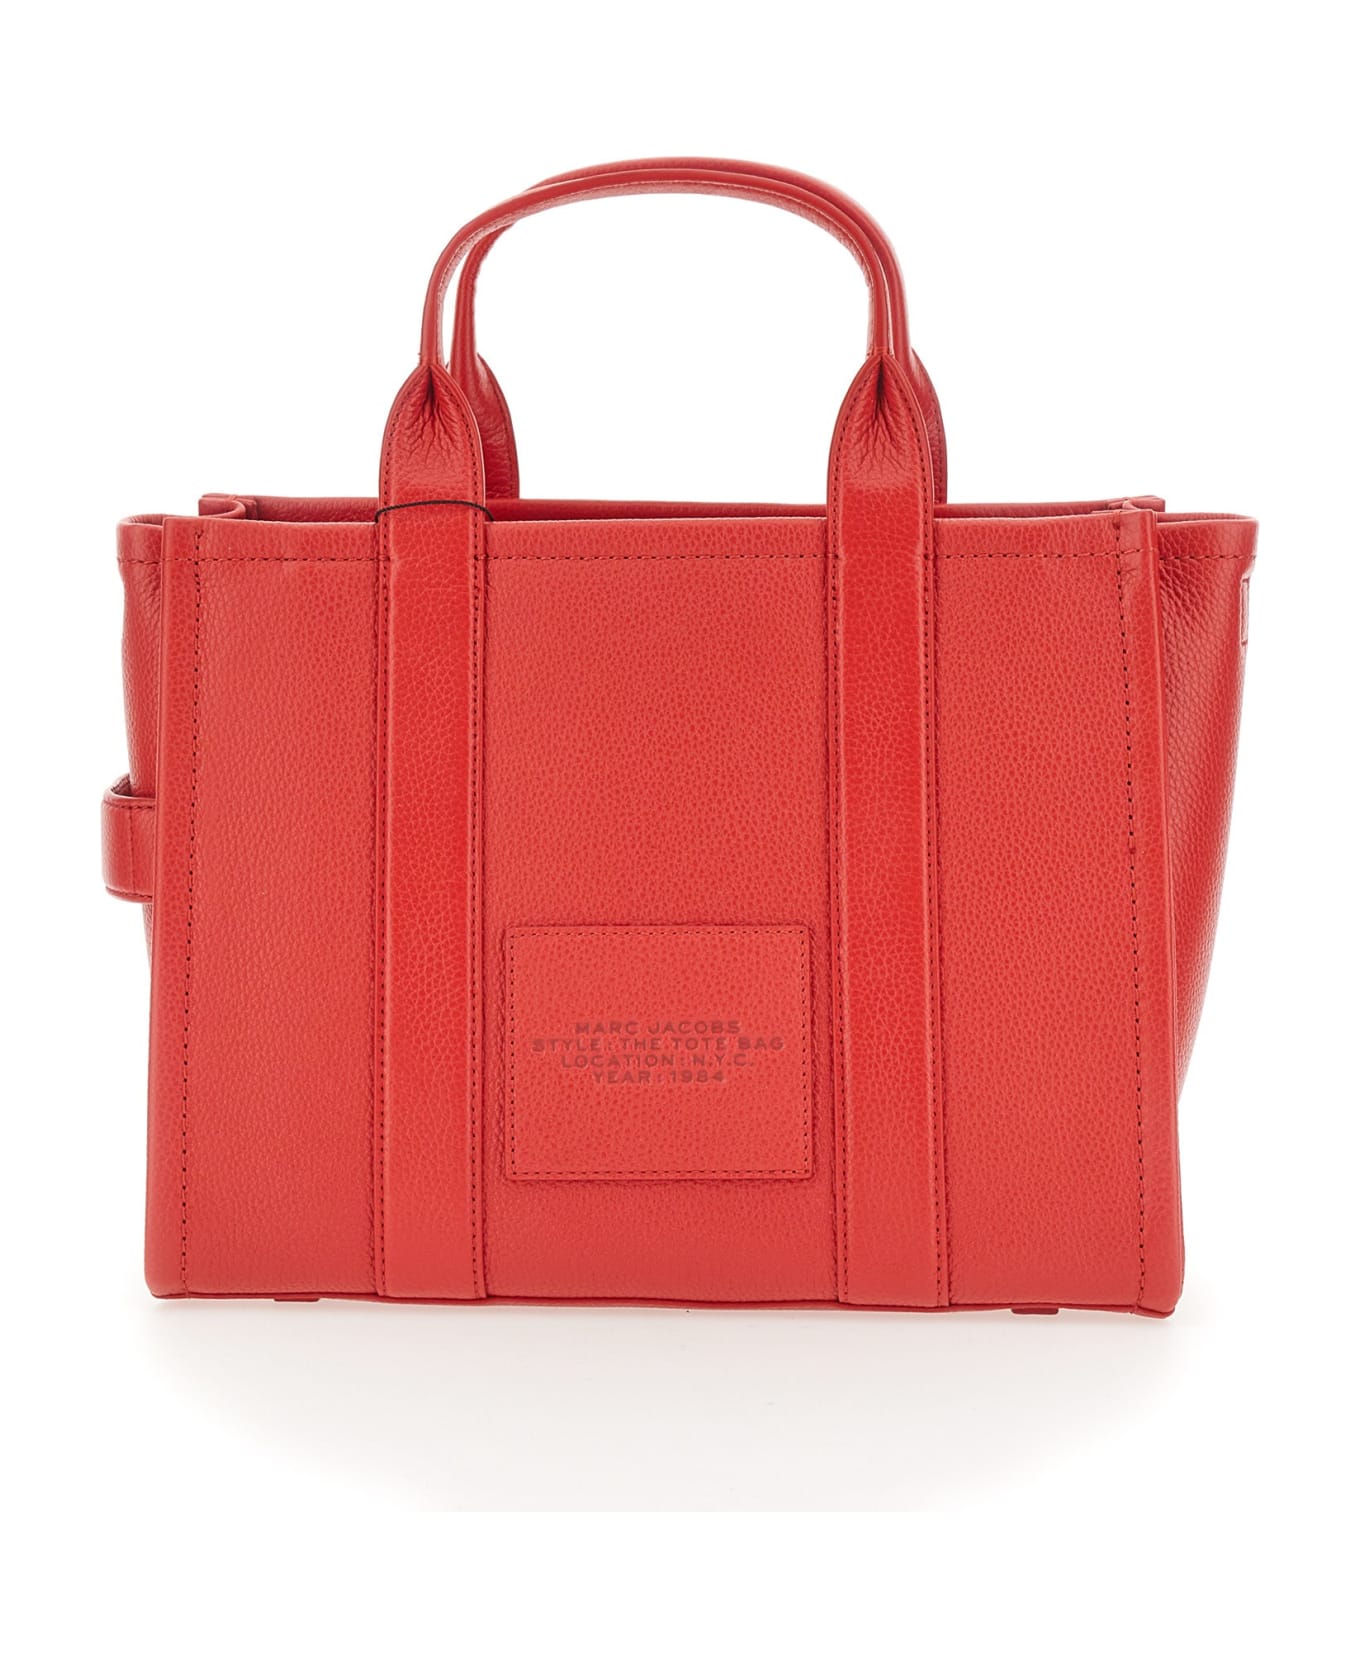 Marc Jacobs The Leather Medium Tote Bag - ROSSO トートバッグ